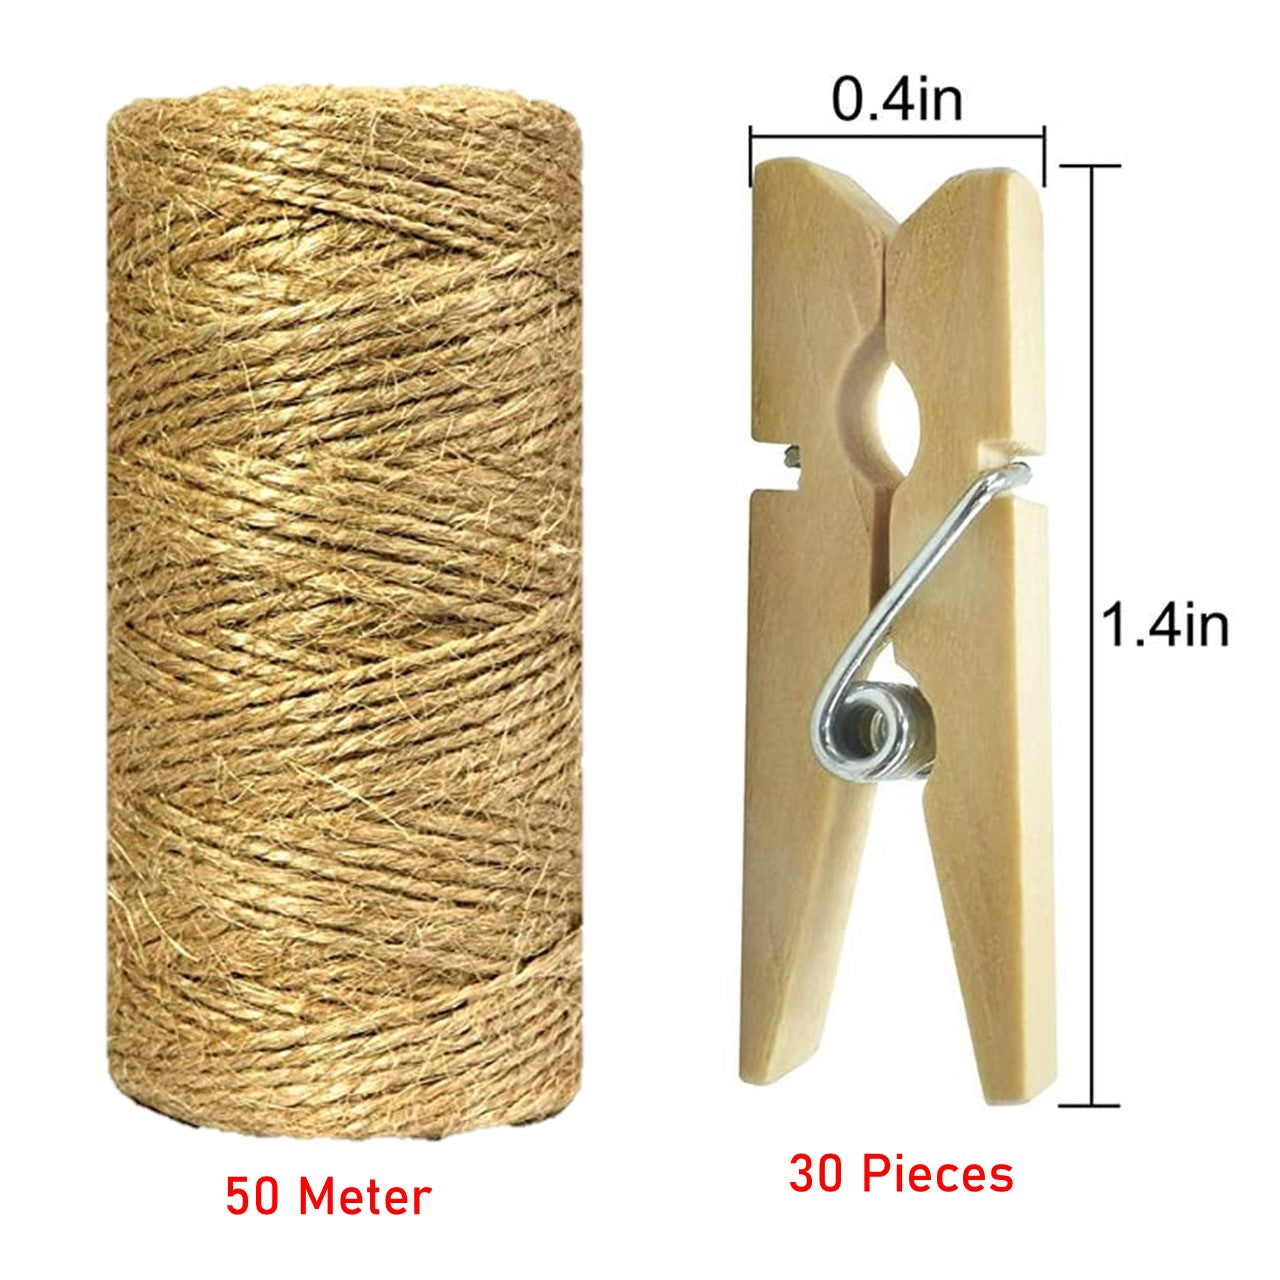 ecofynd Mini Natural Wood Pin with Jute Rope Wooden Pins freeshipping - Ecofynd